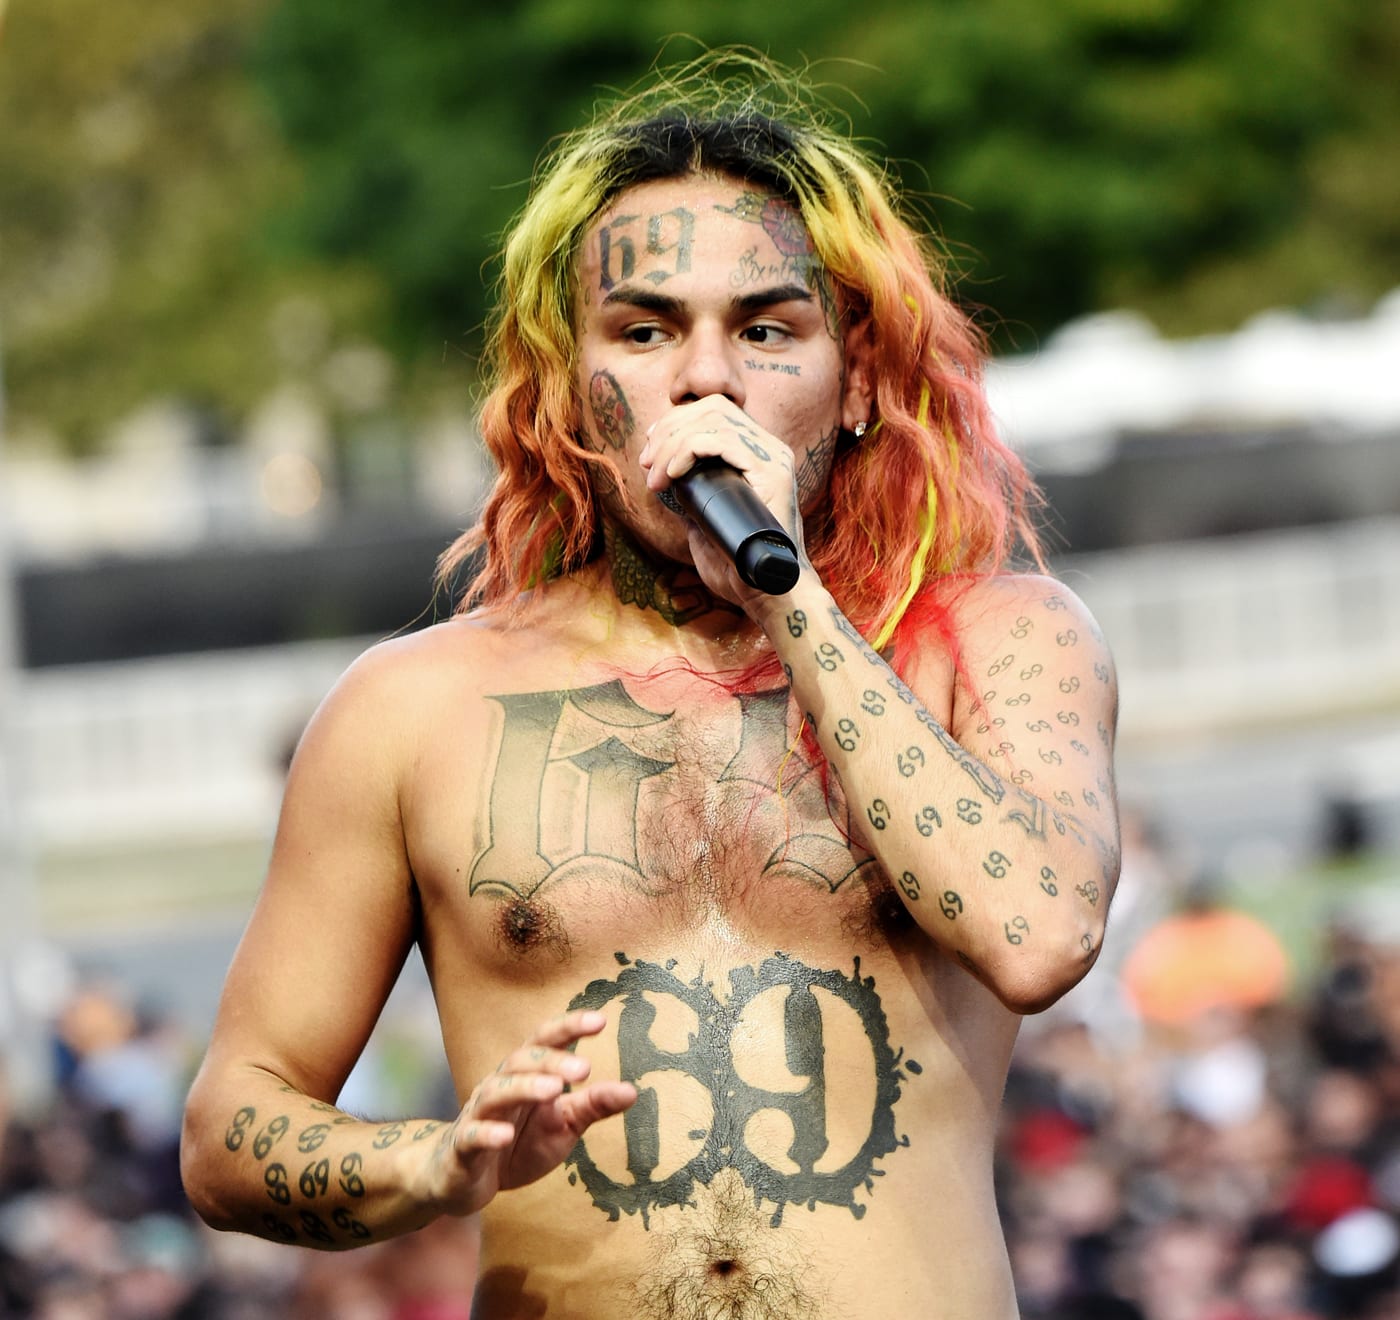 It Would Take 6ix9ine Over a Year to Get Rid of His Tattoos, According to Removal Specialist